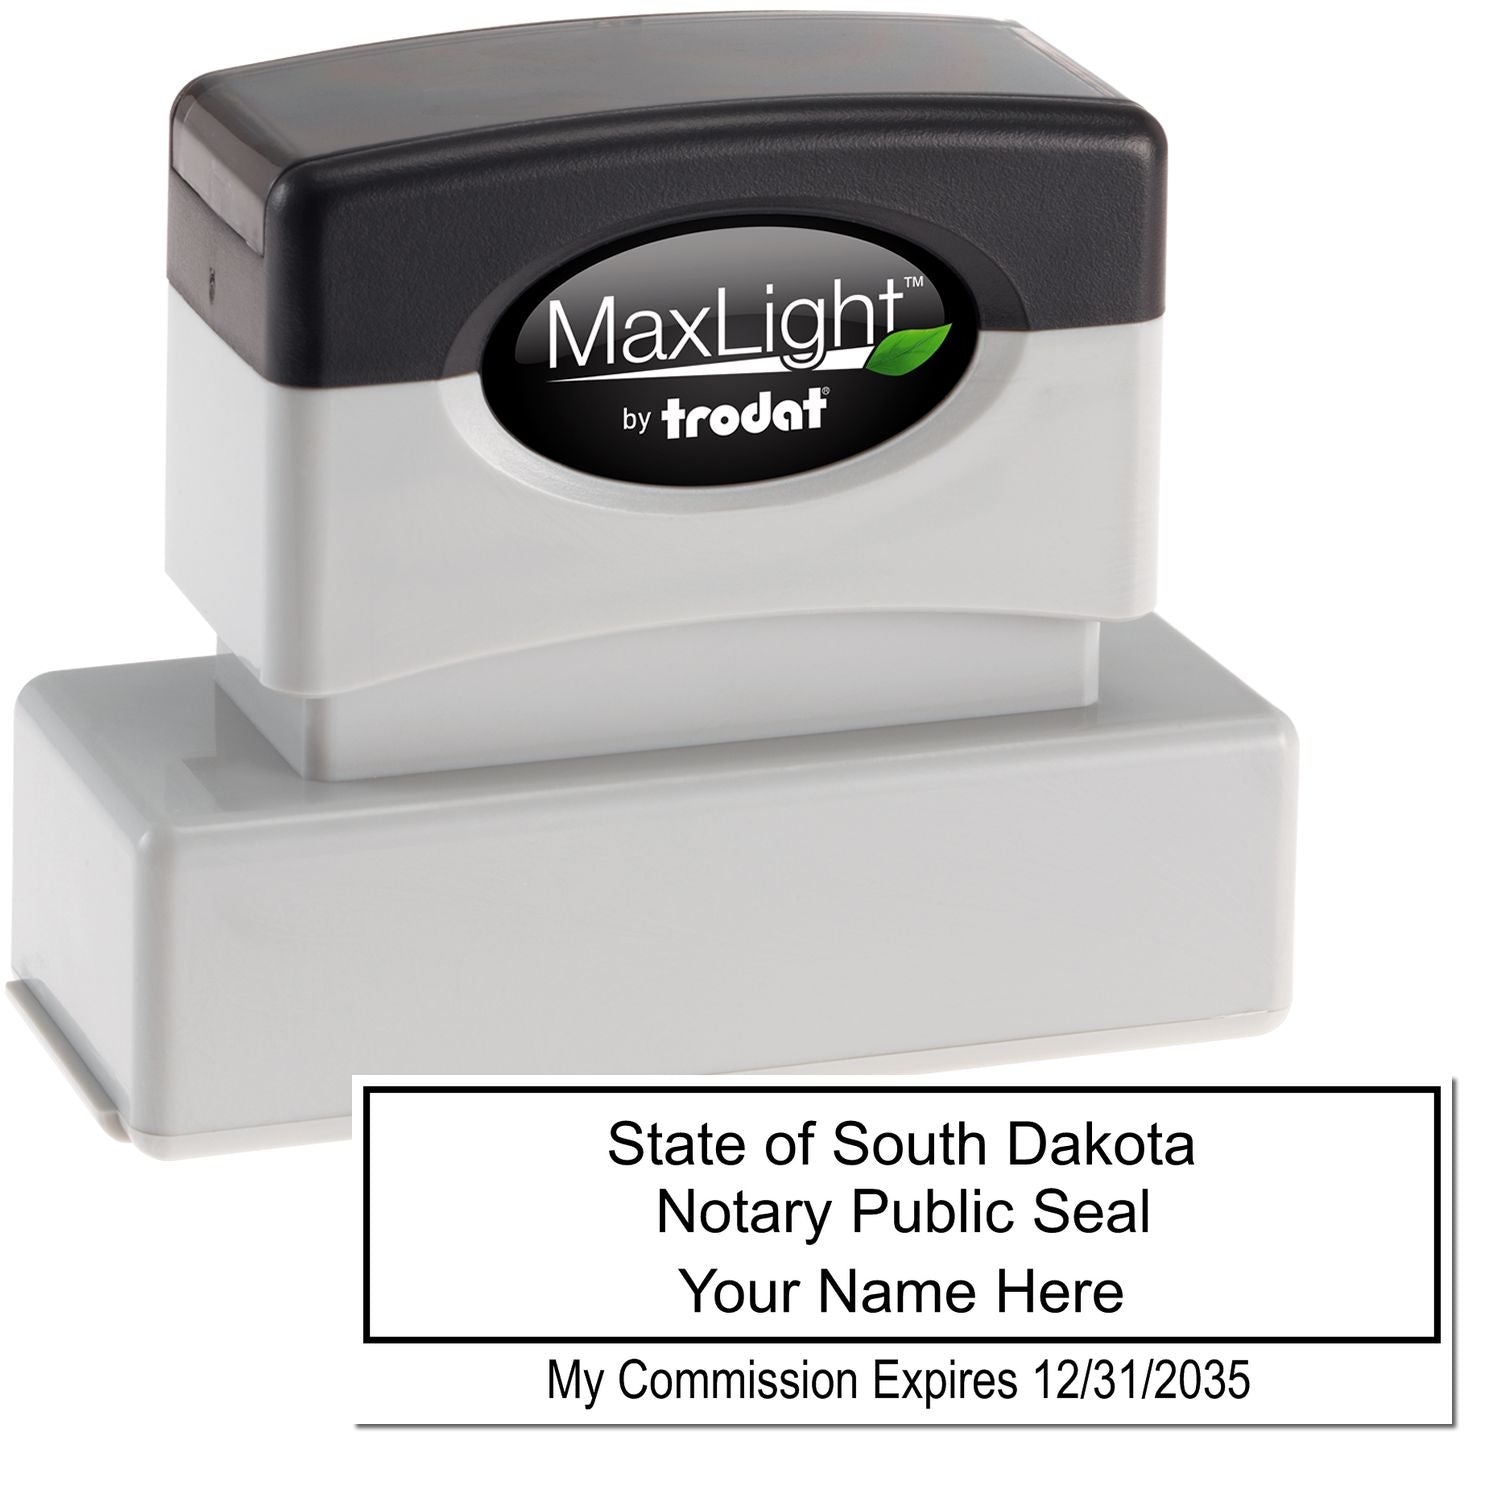 The main image for the MaxLight Premium Pre-Inked South Dakota Rectangular Notarial Stamp depicting a sample of the imprint and electronic files